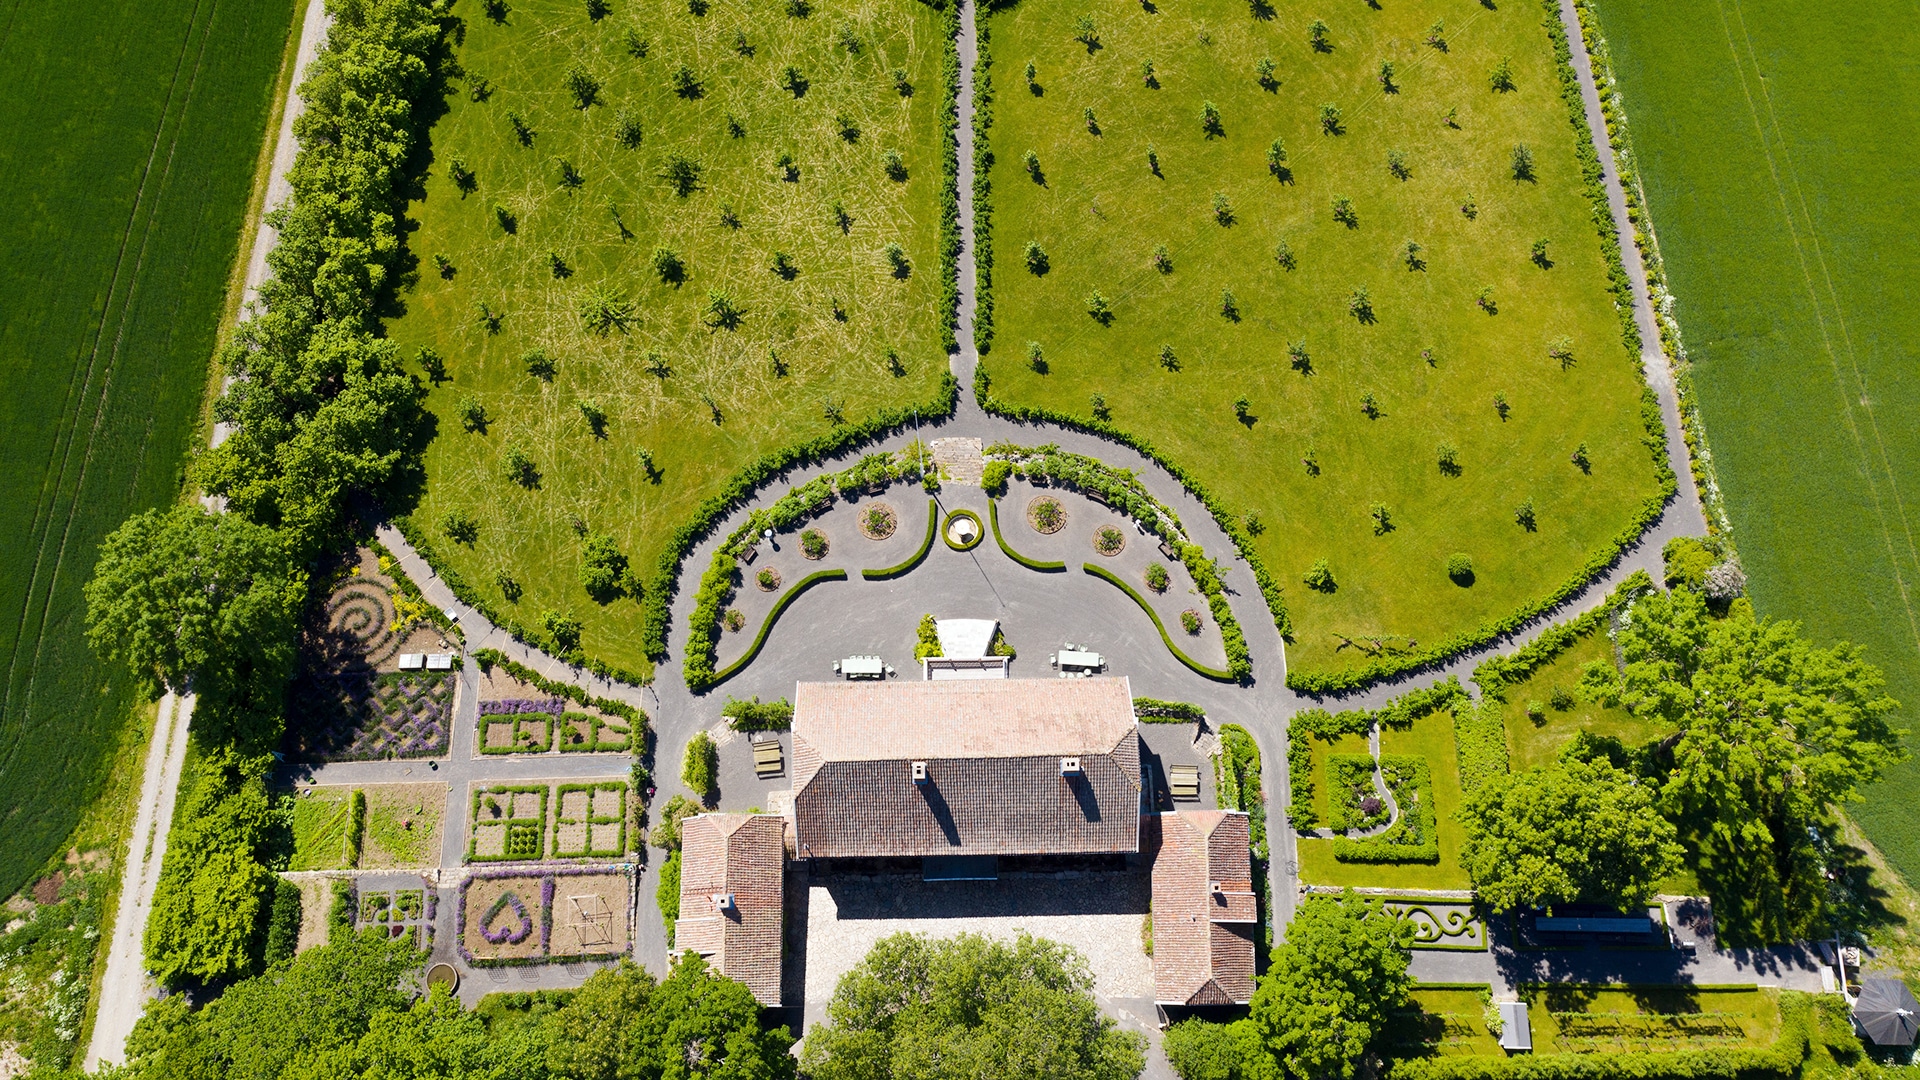 Topshot of the amazing gardens of Hovelsrud farm surrounding the main house on a sunny summer day.